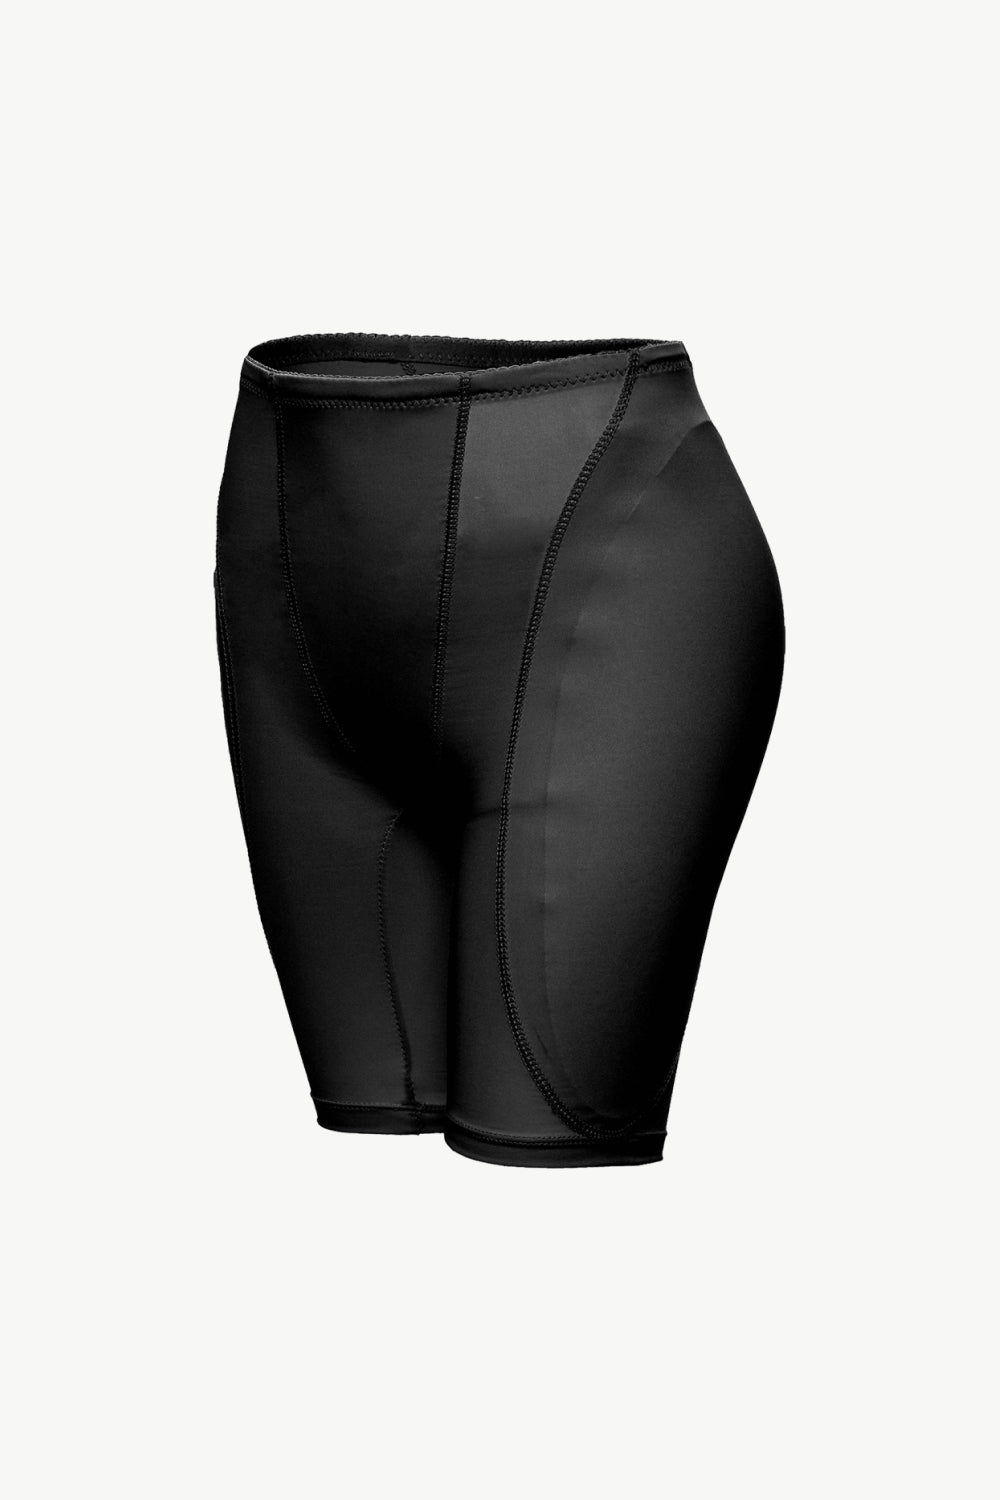 Full Size Lifting Pull-On Shaping Shorts - DromedarShop.com Online Boutique